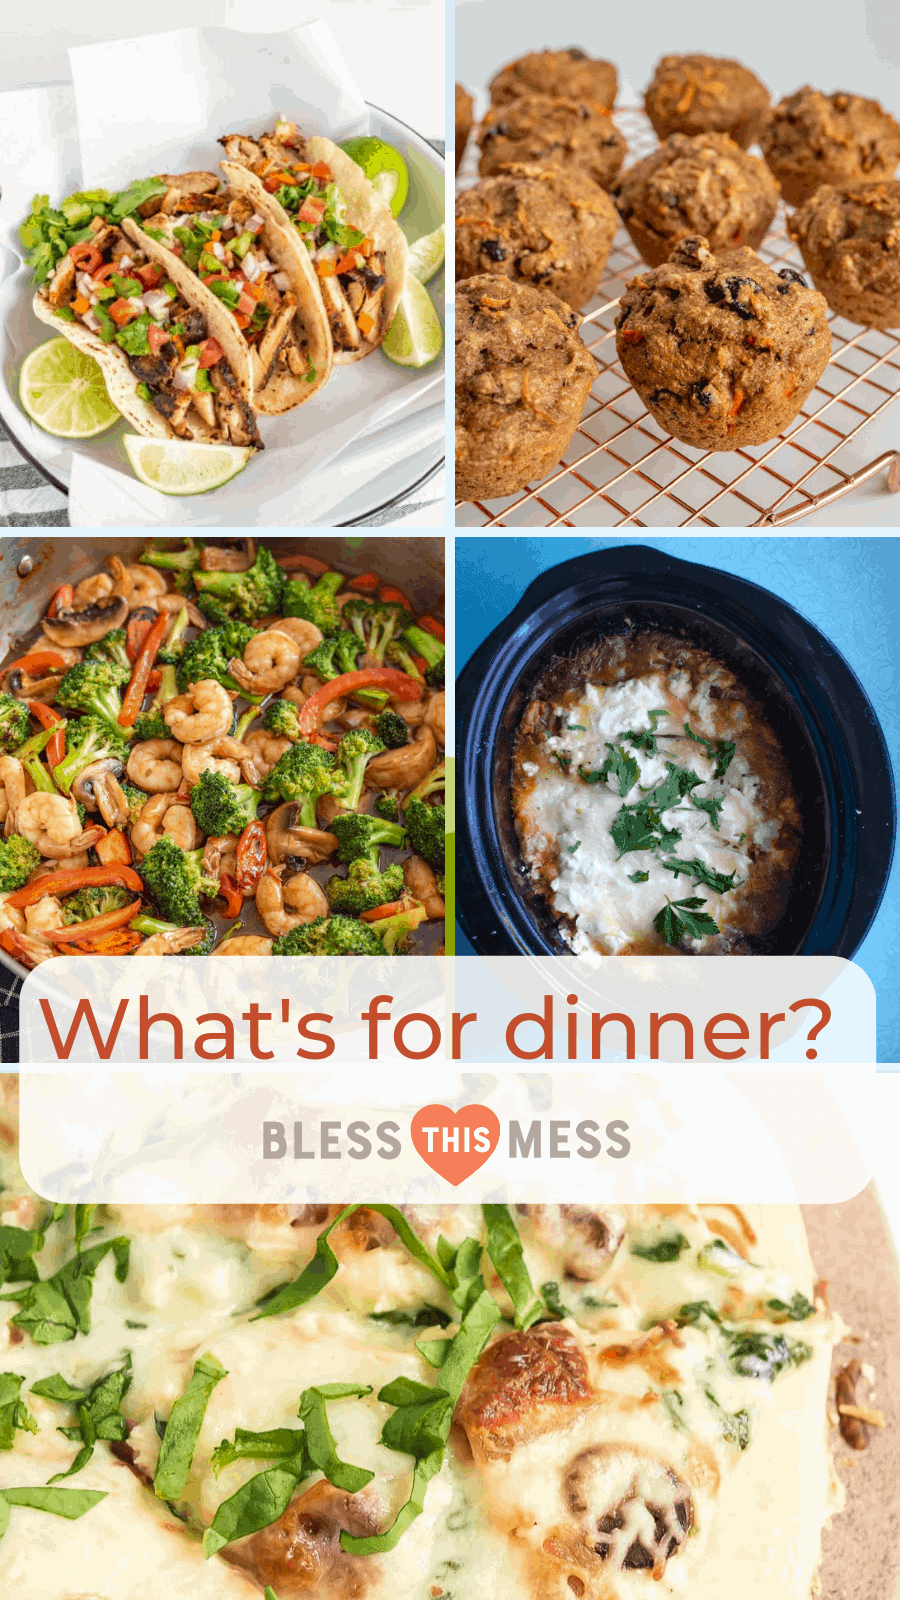 With this easy-to-follow guide, you'll know exactly what to make for dinner every night, even if you don't have a ton of time or home-cooked meals stress you out!